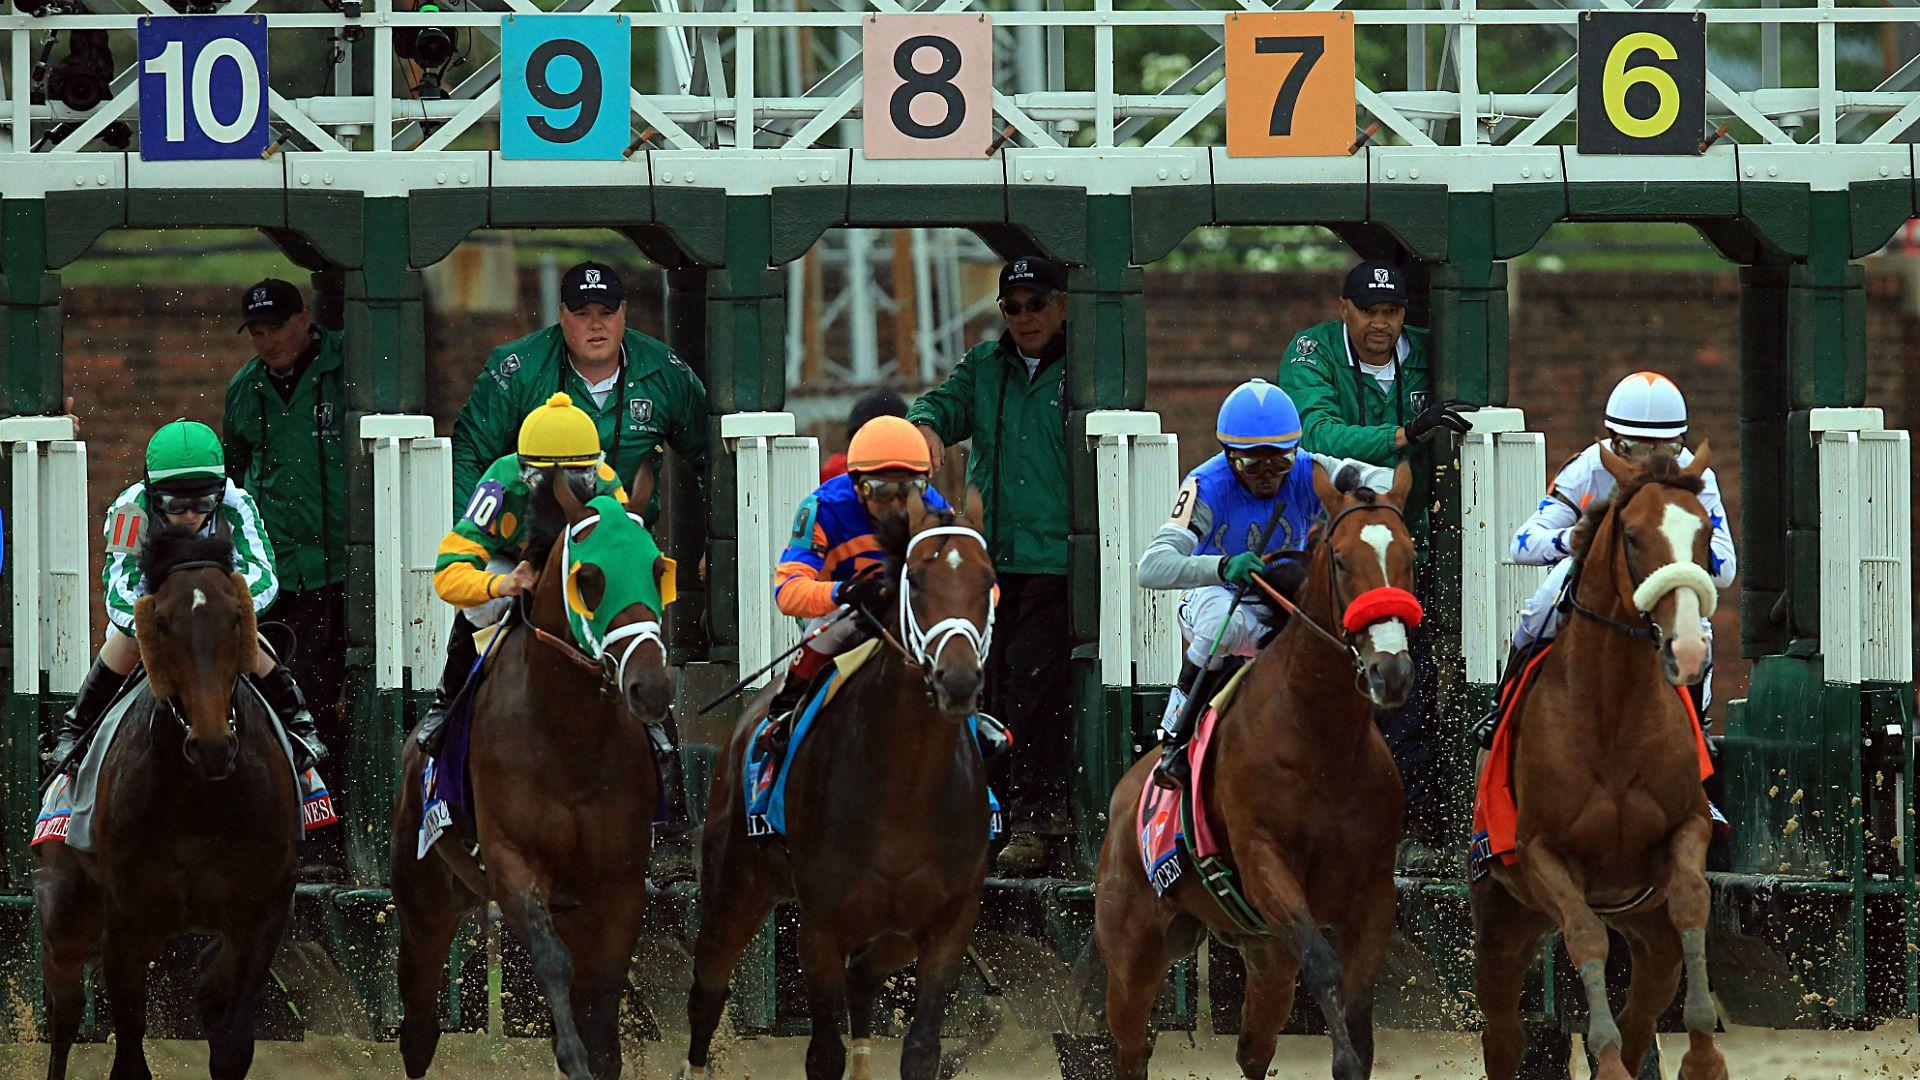 Kentucky Derby 2016: Post position draw time, TV channel, morning